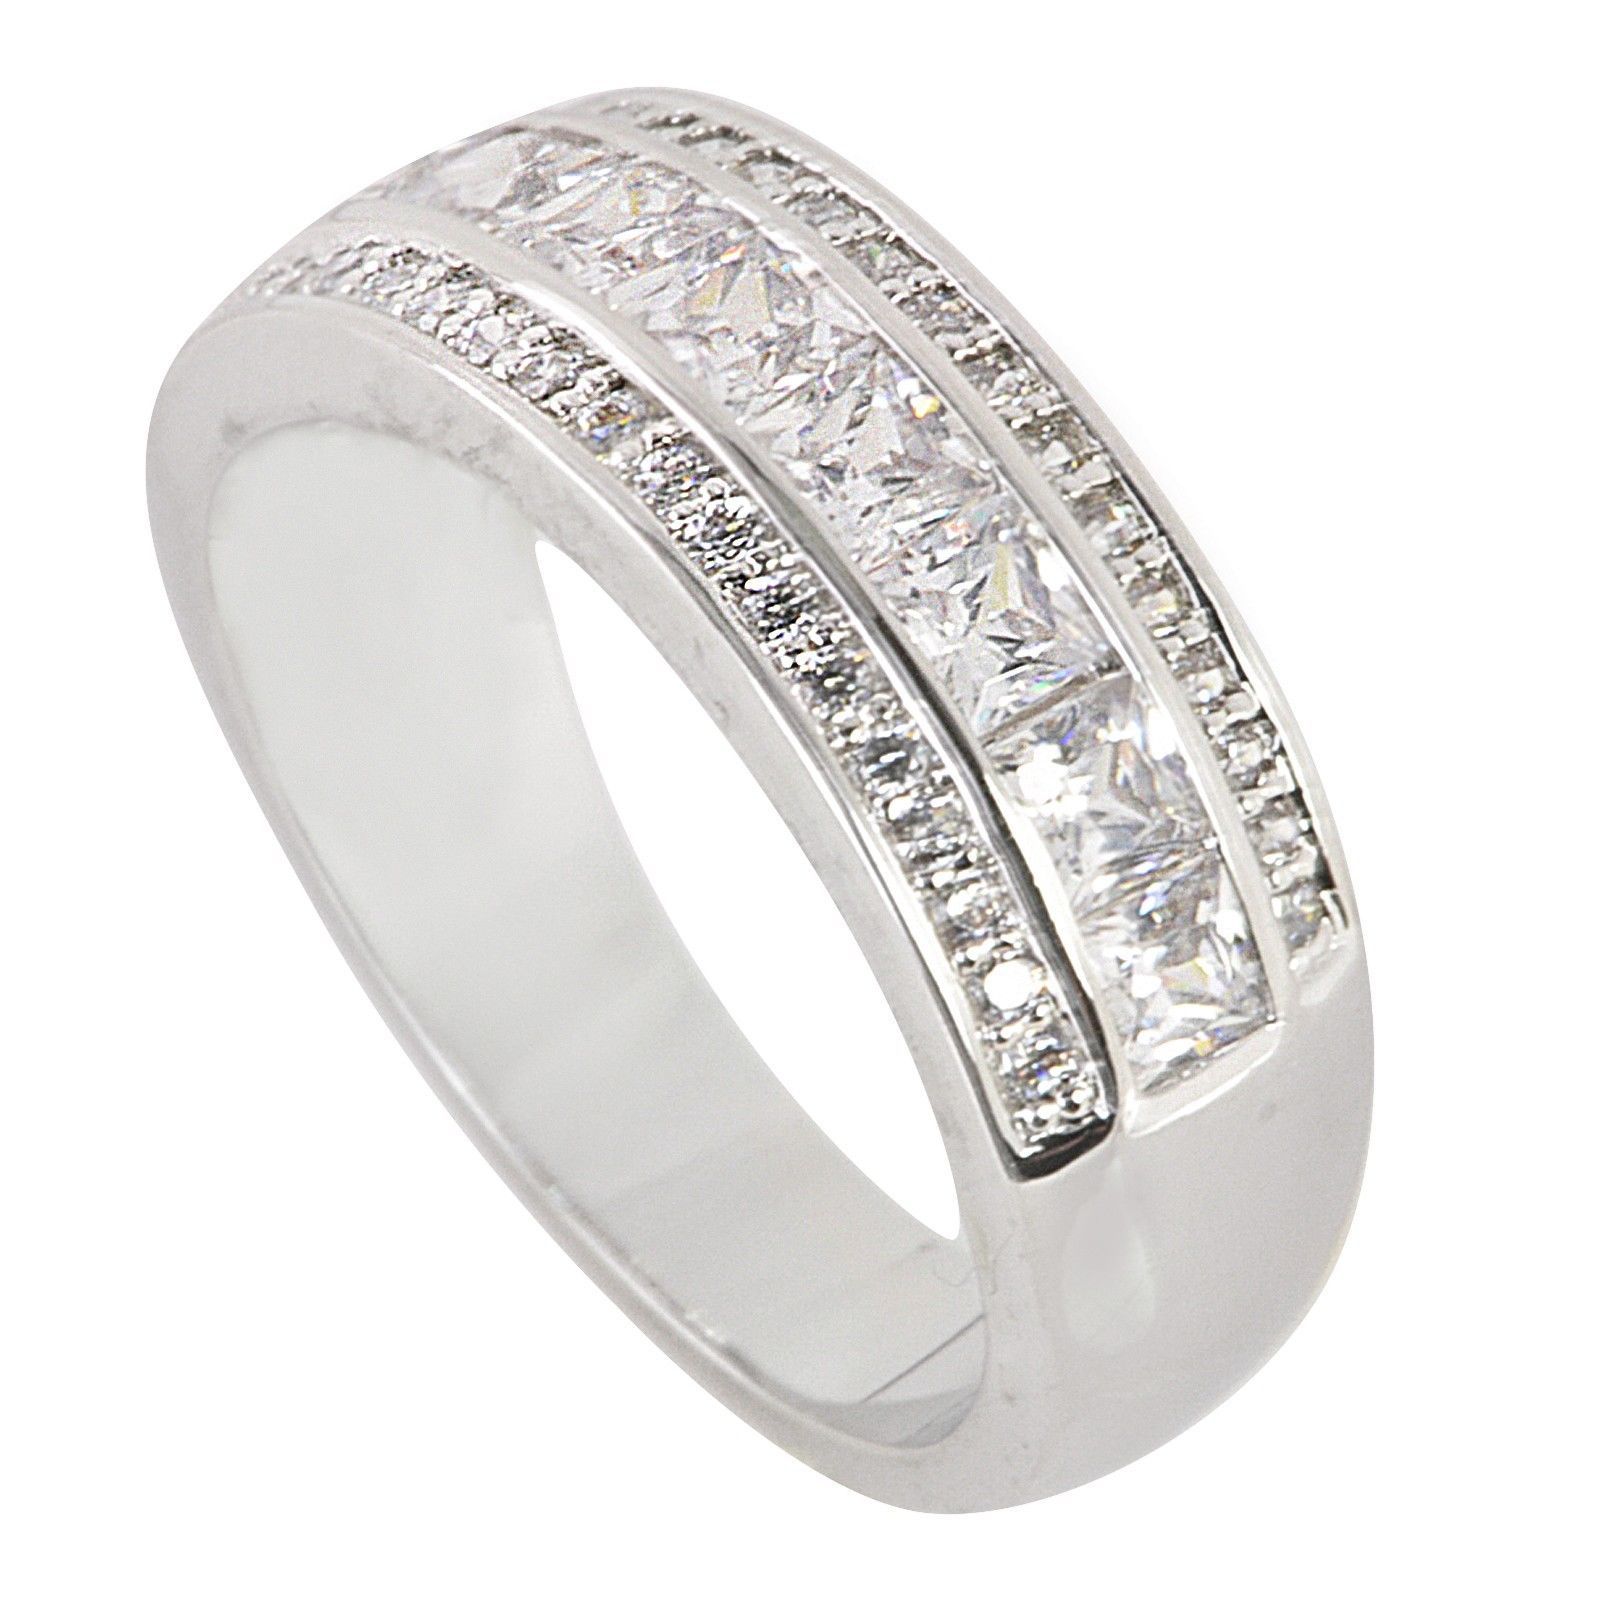 Womens Sterling Silver Ring Cubic Zirconia 3 Row Band Rhodium - 7mm